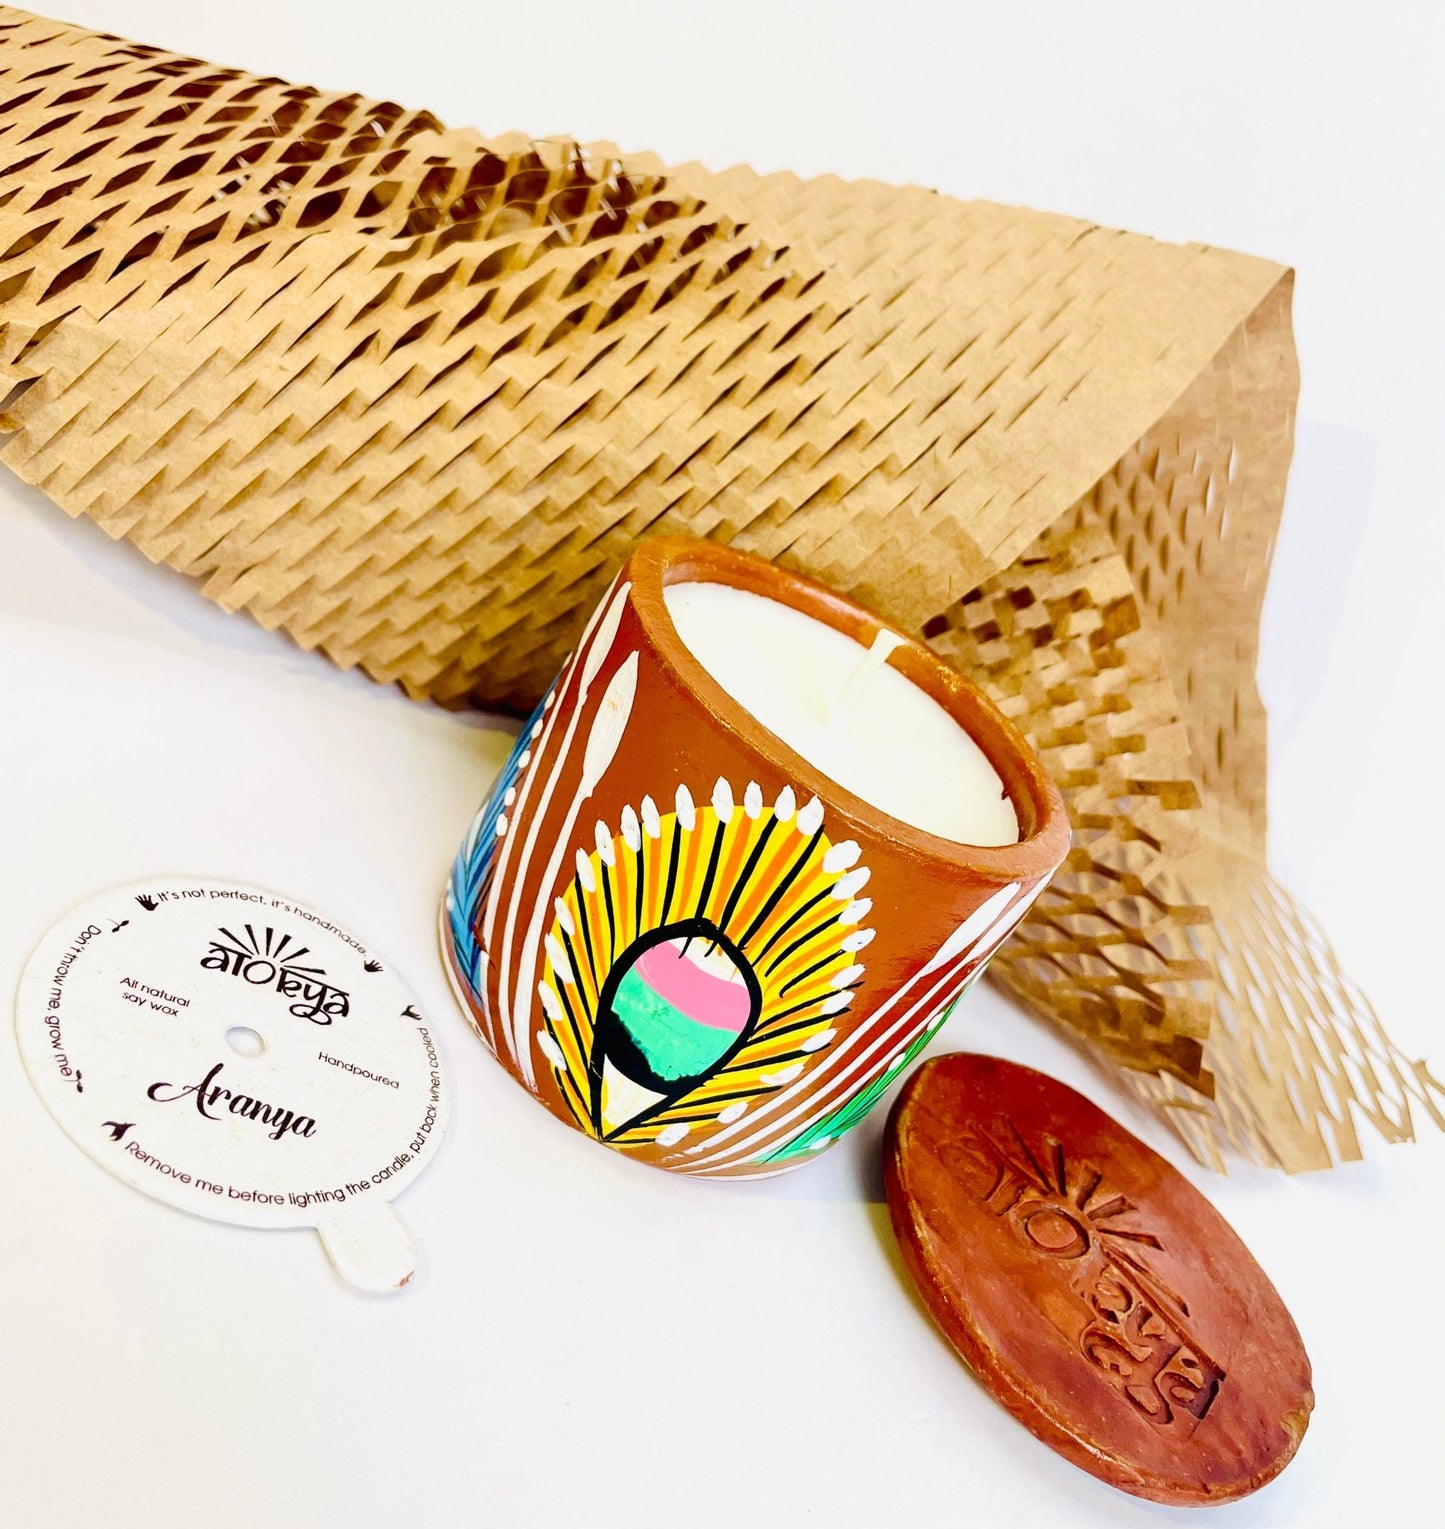 100% natural soy wax scented candle in a terracotta jar hand-painted with yellow feathers is placed near a seed paper candle dust cover, terracotta clay candle snuffer and honeycomb paper